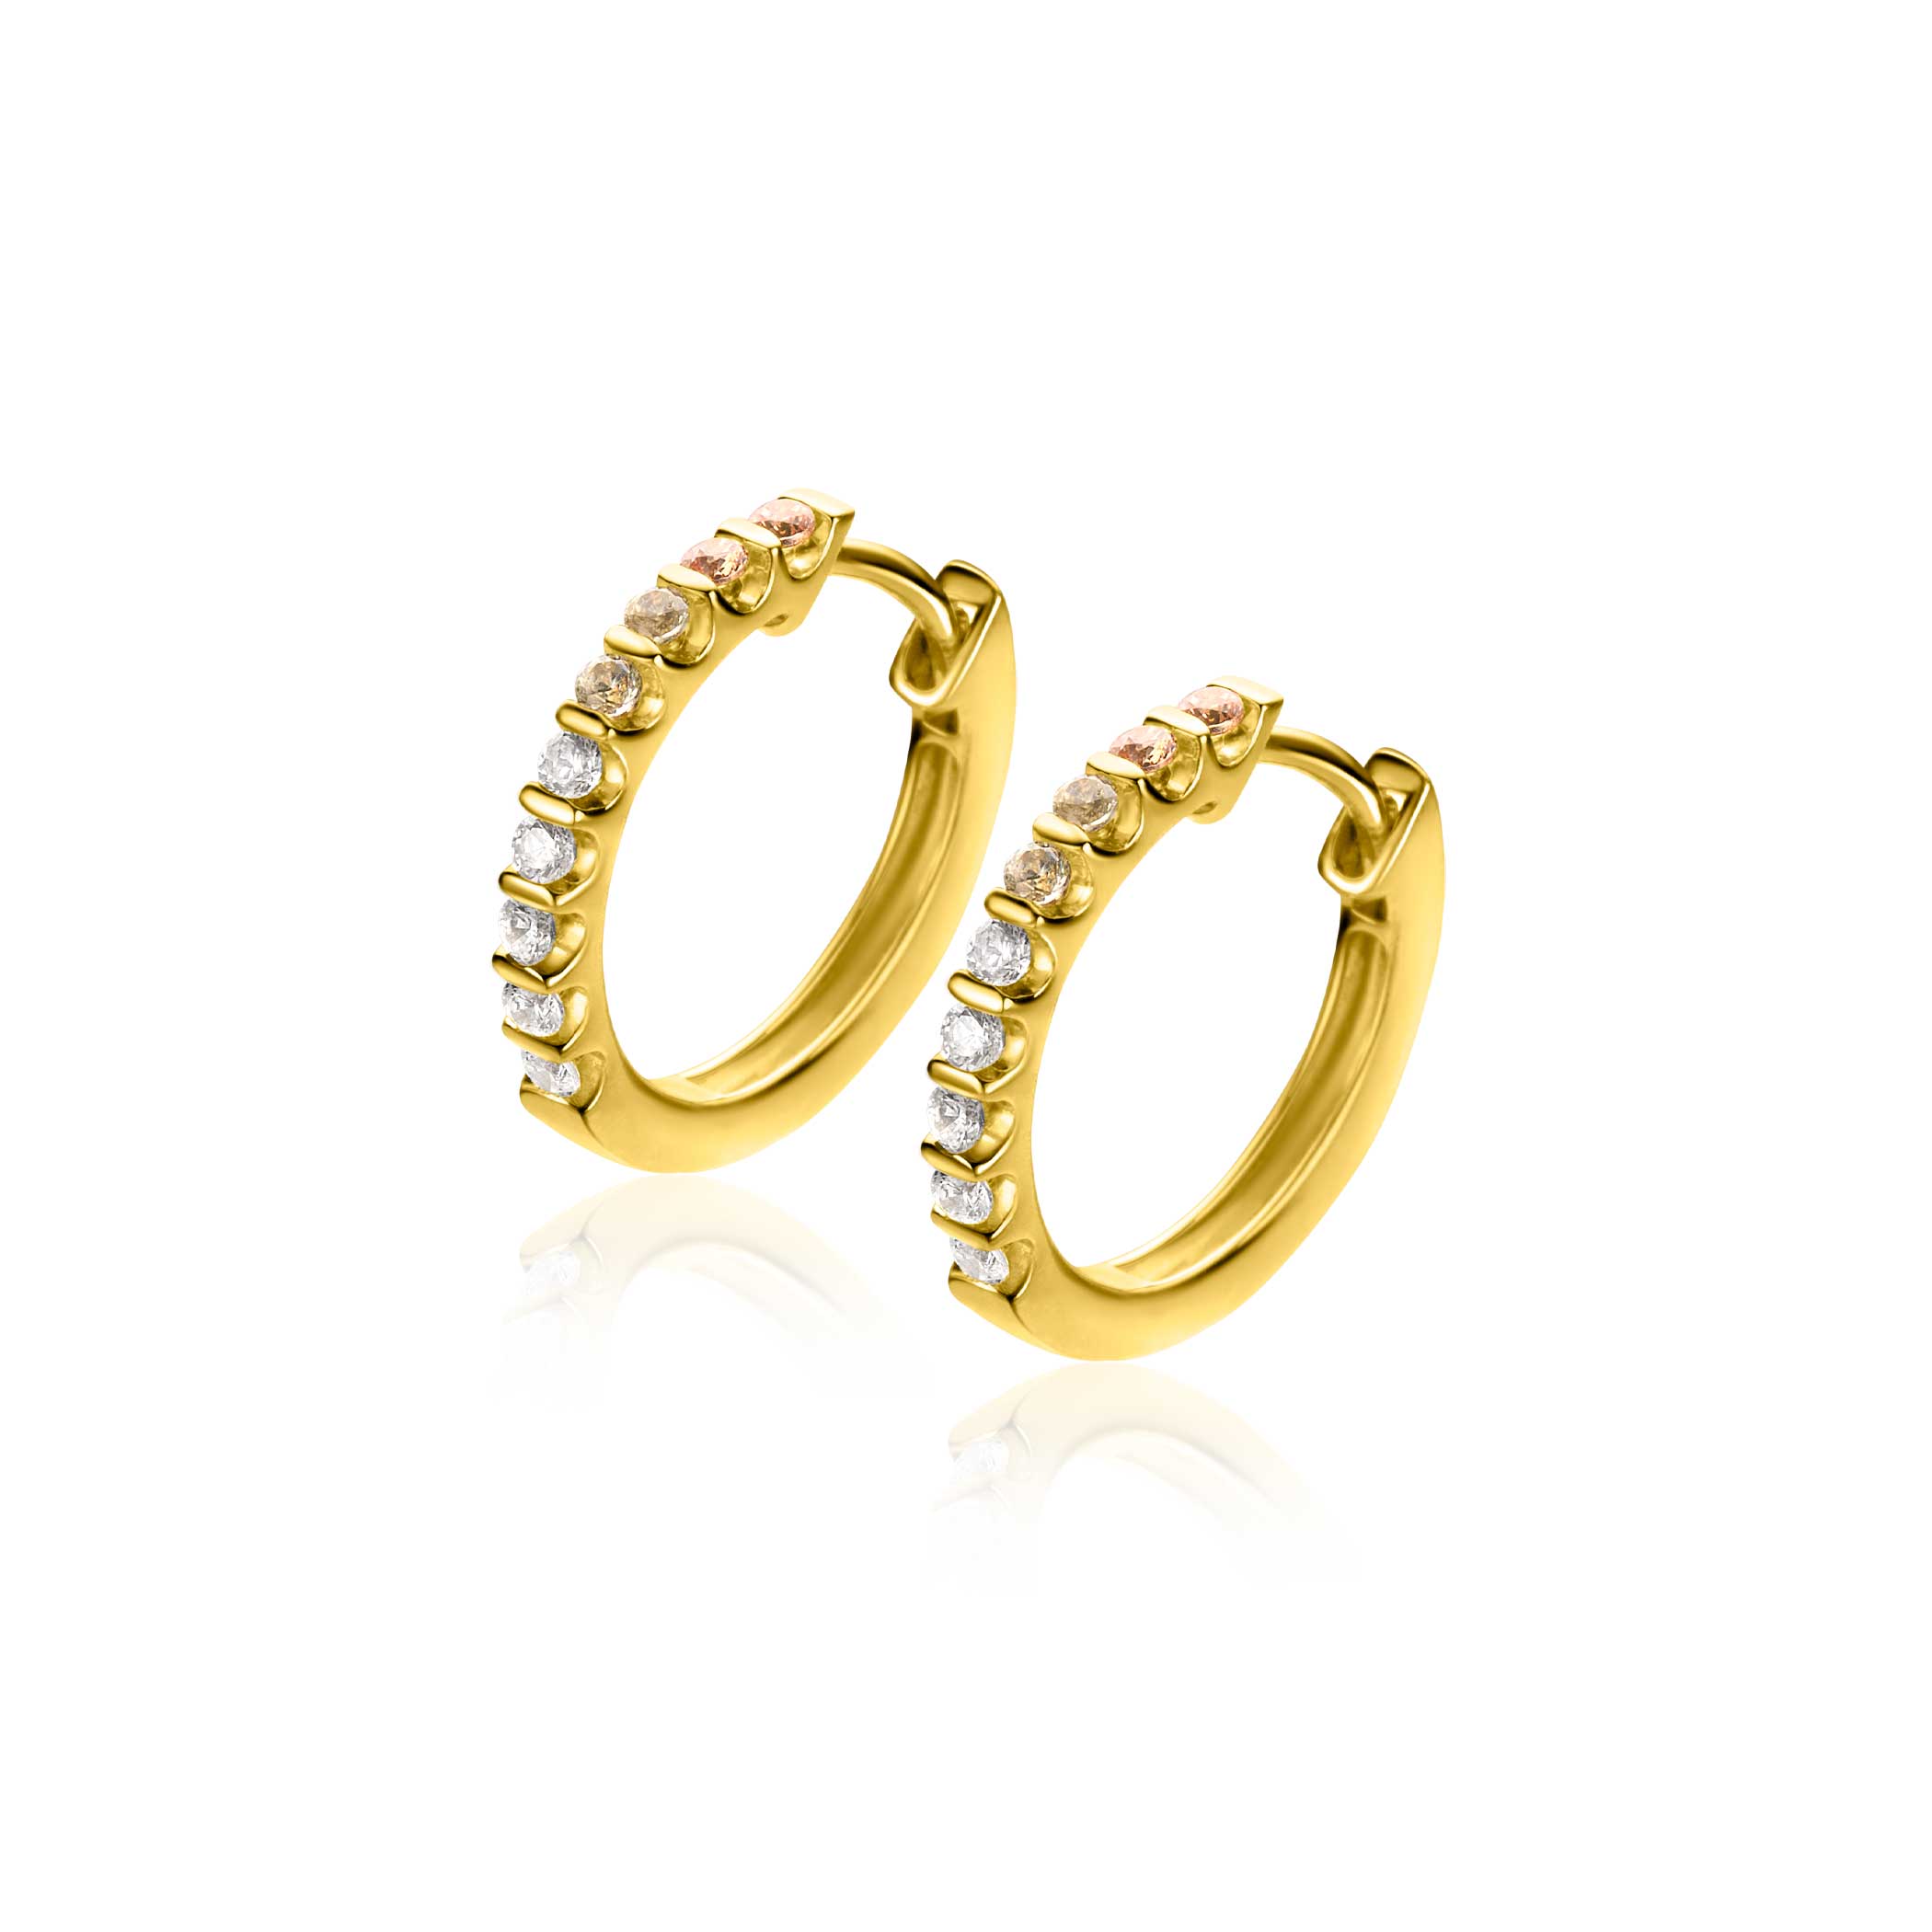 15mm ZINZI gold plated silver hoops set with champagne, peridot and white zirconia with luxury hinge closure ZIO2612